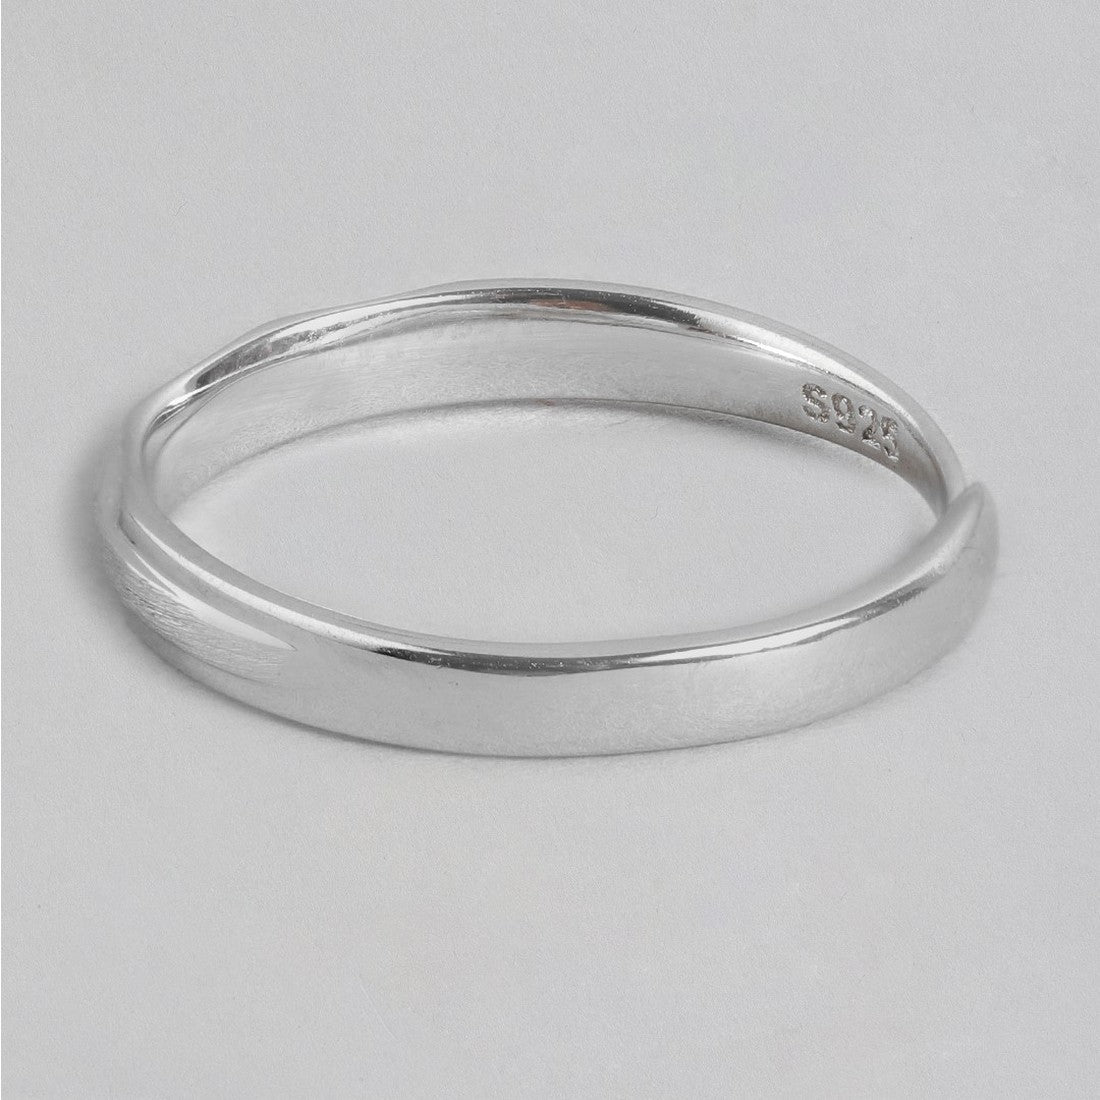 Rhodium Plated Minimalistic 925 Sterling Silver Band Ring (Adjustable) For Him (Adjustable)